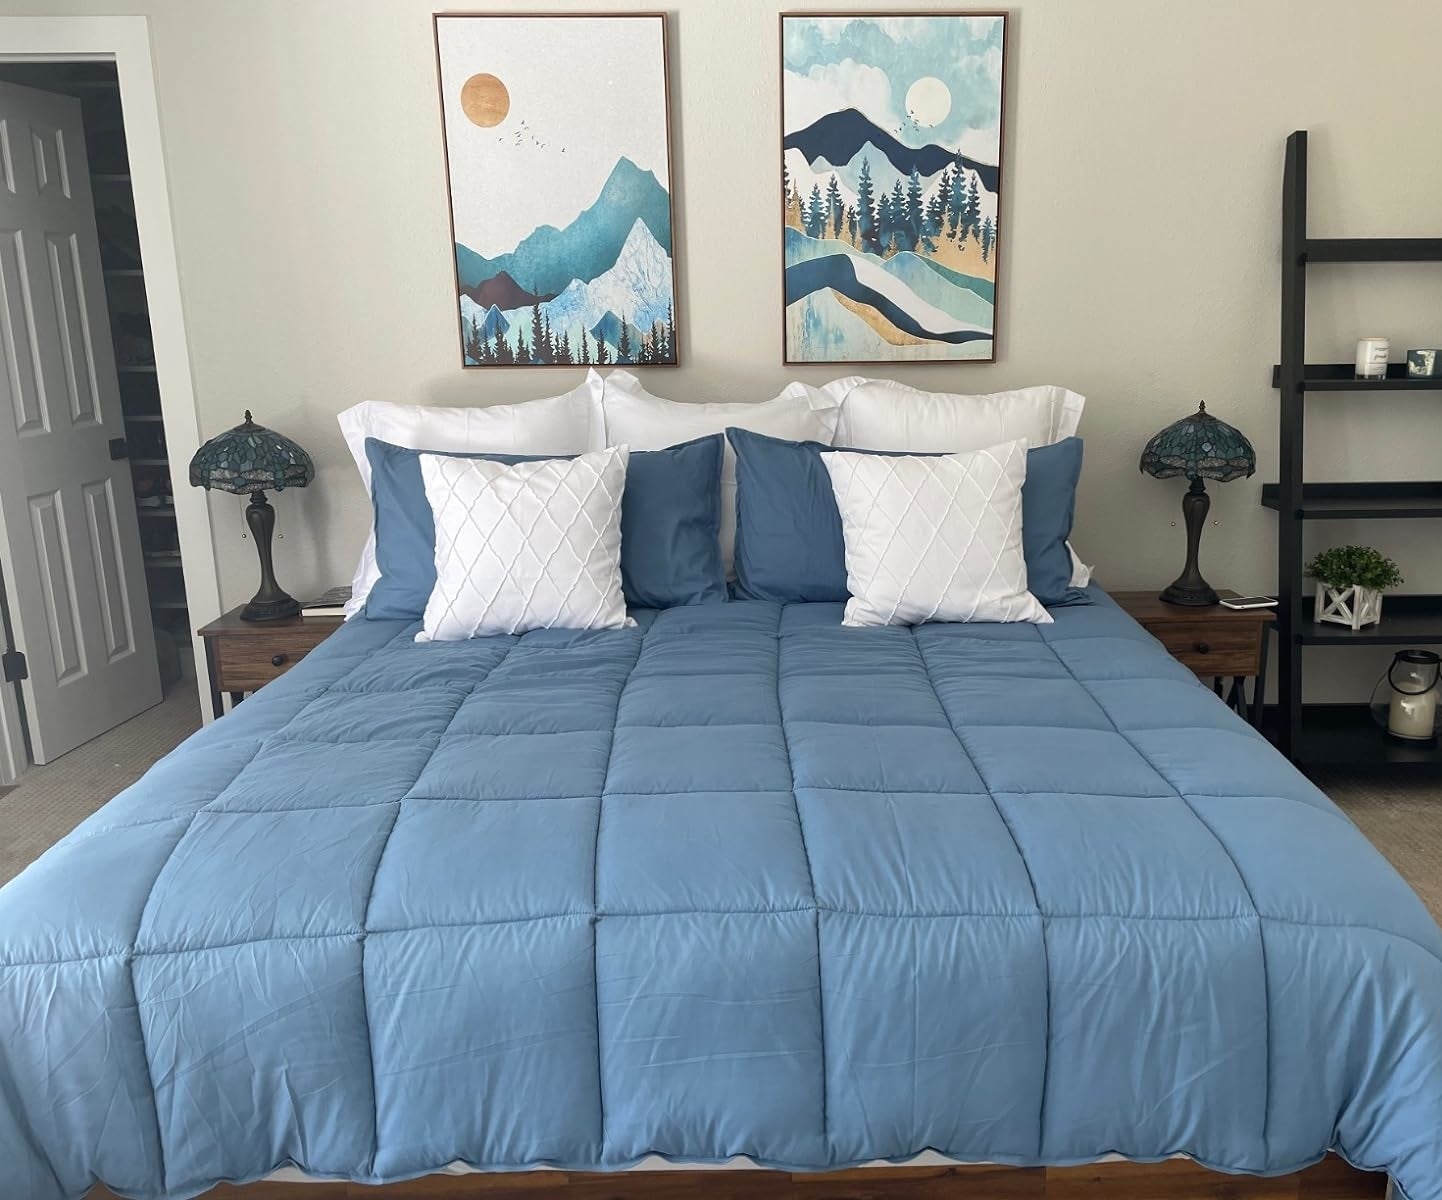 A neatly made bed with a blue comforter, white and blue pillows, flanked by two nightstands and decorative lamps, with wall art above